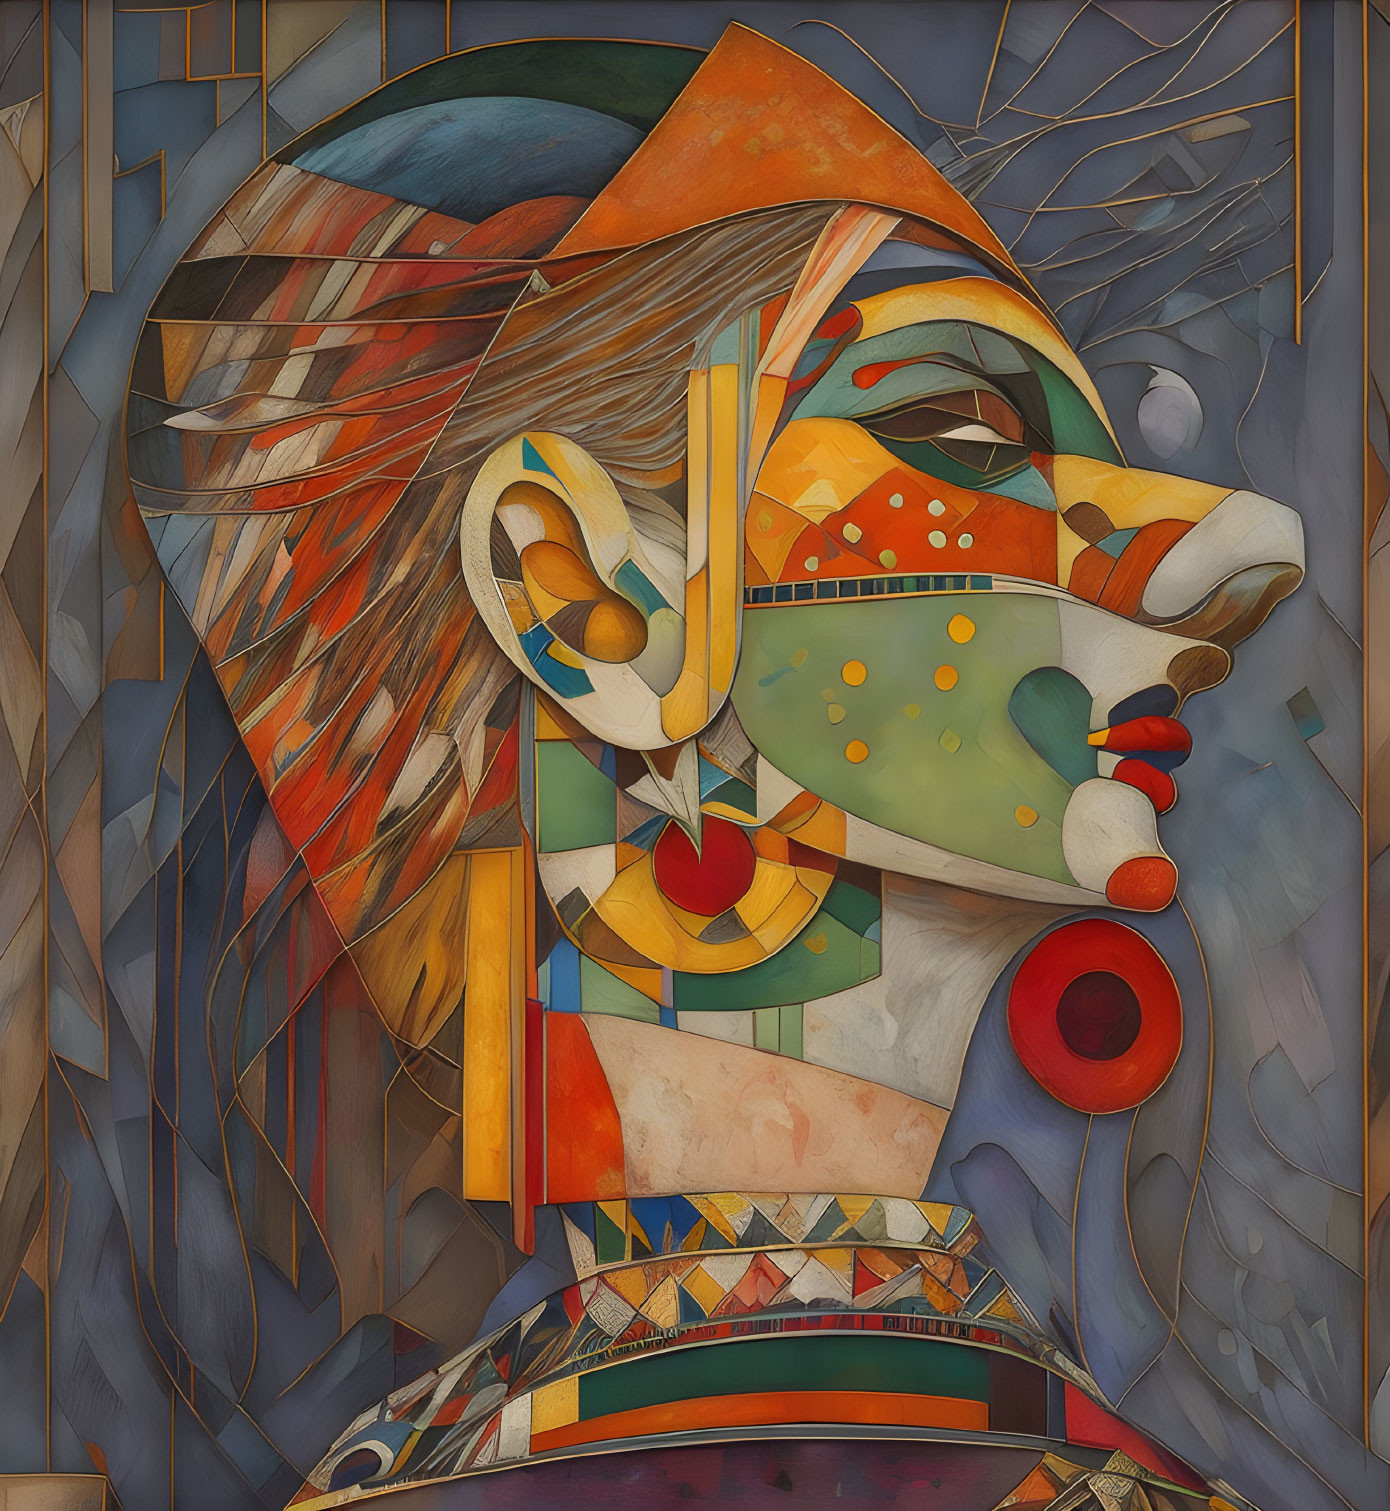 Abstract cubist portrait with colorful geometric shapes and patterns.